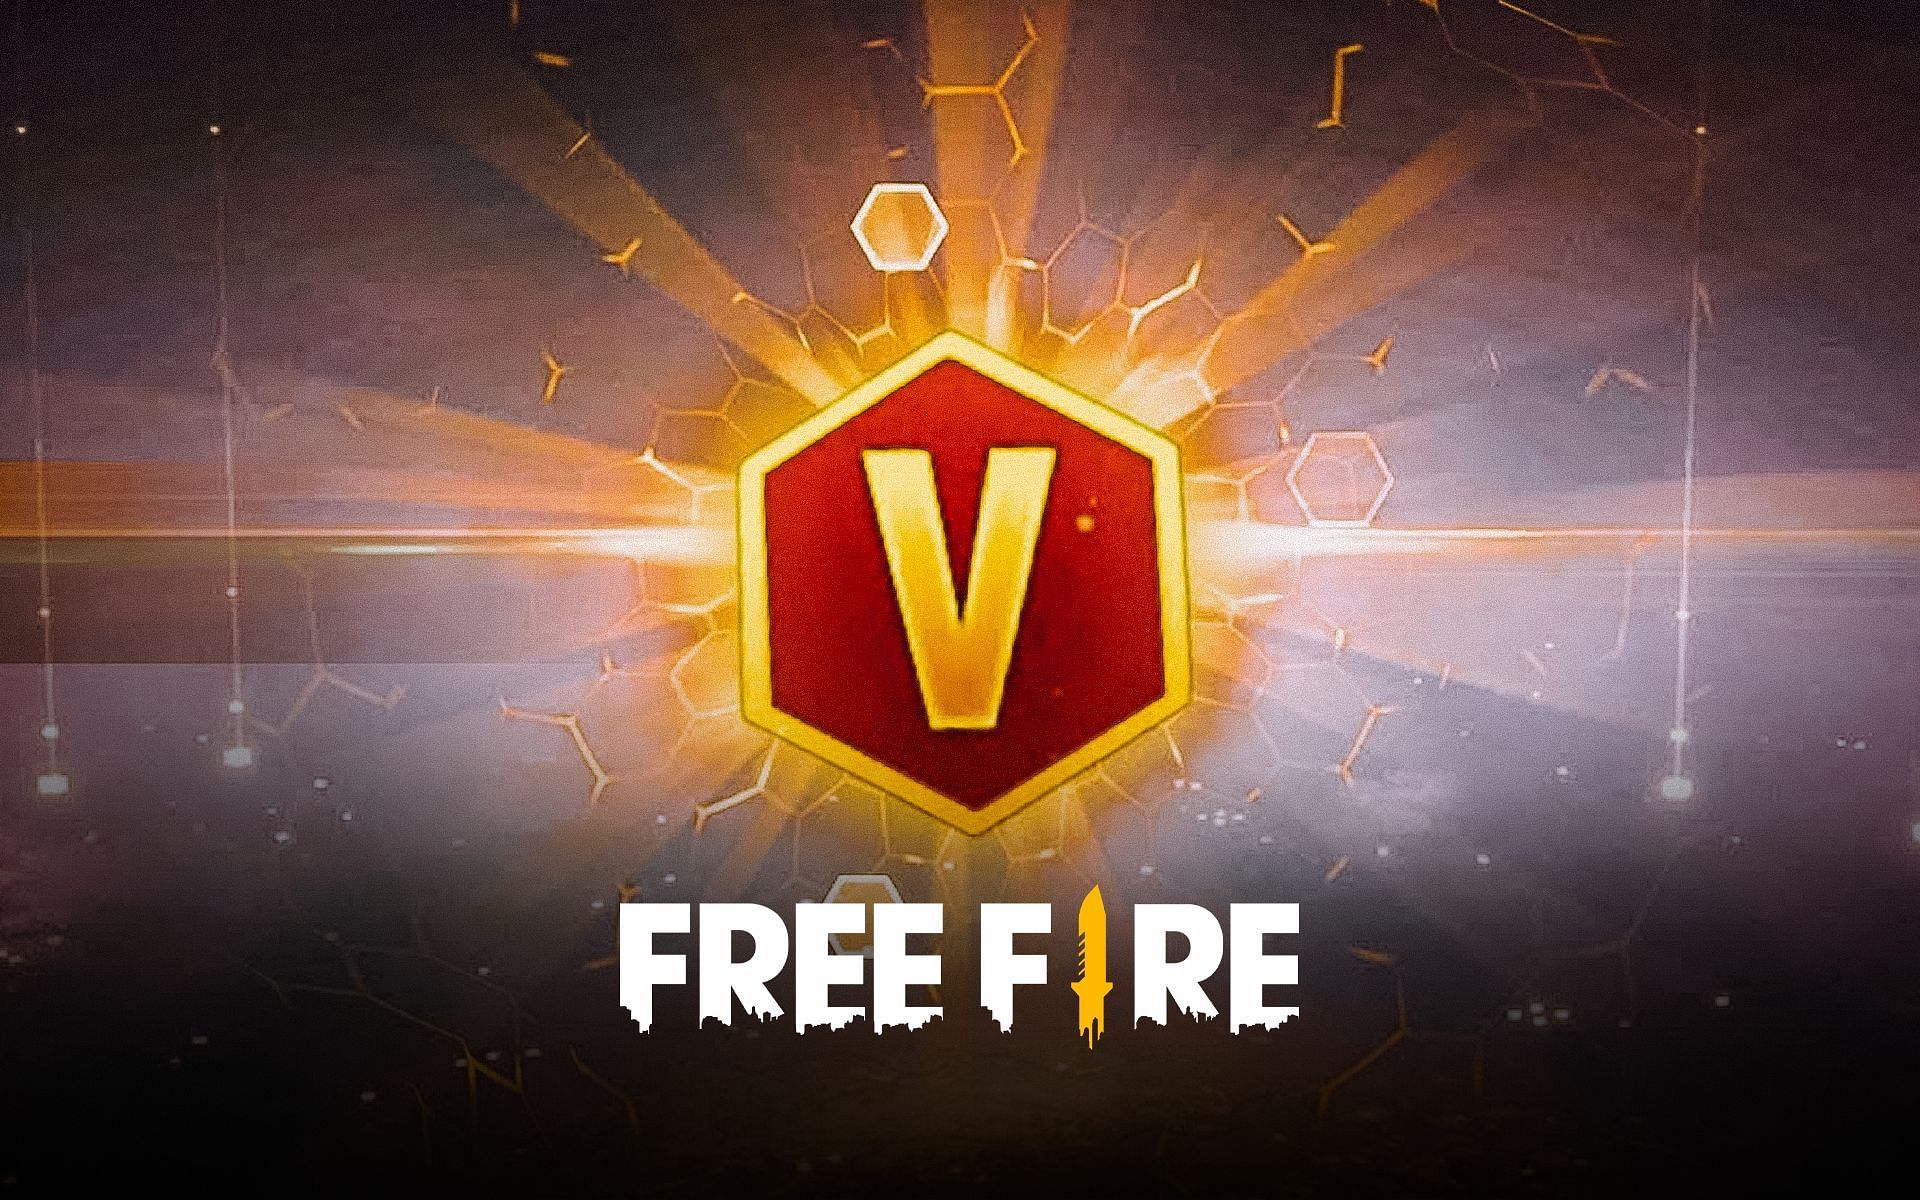 V Badge is one of the items that a lot of players wish to obtain (Image via Sportskeeda)